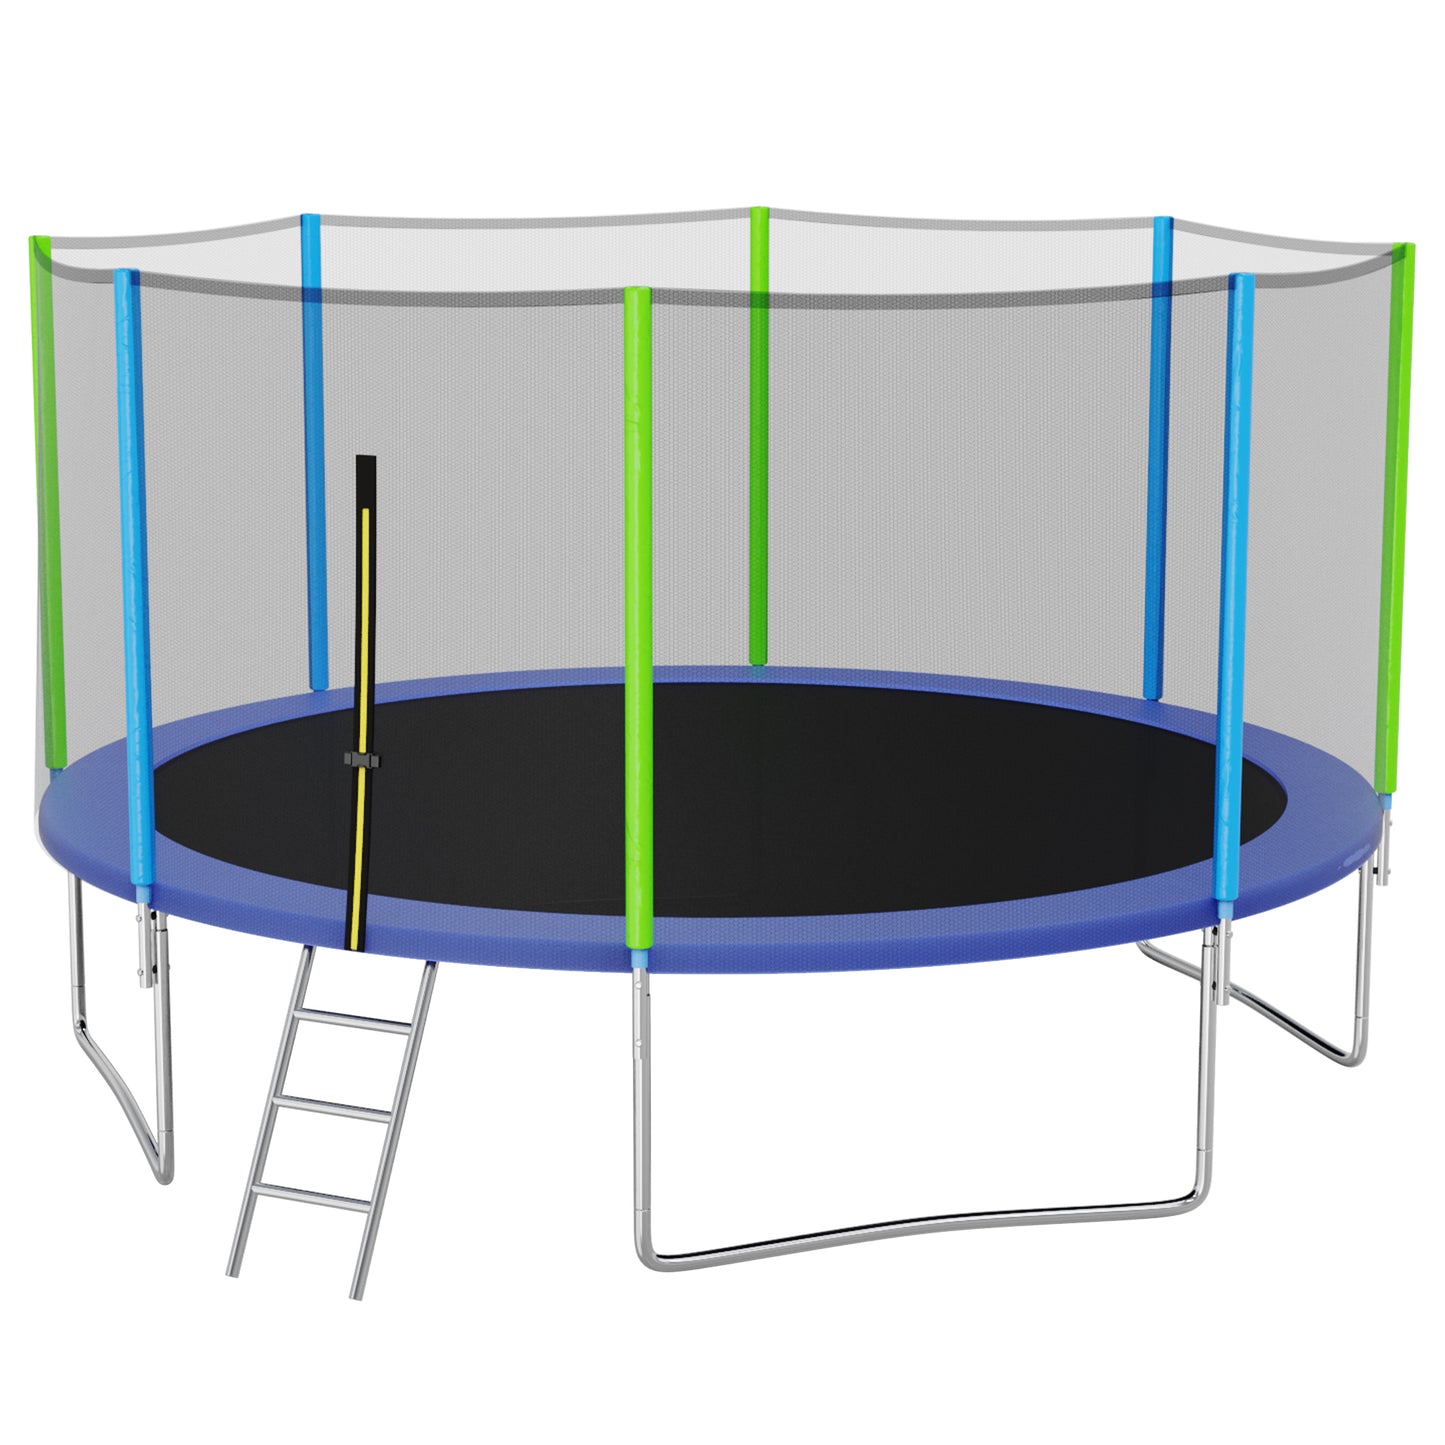 14FT Trampoline for Kids with Safety Enclosure Net, Ladder d 8 Wind Stakes, Spring Cover Padding